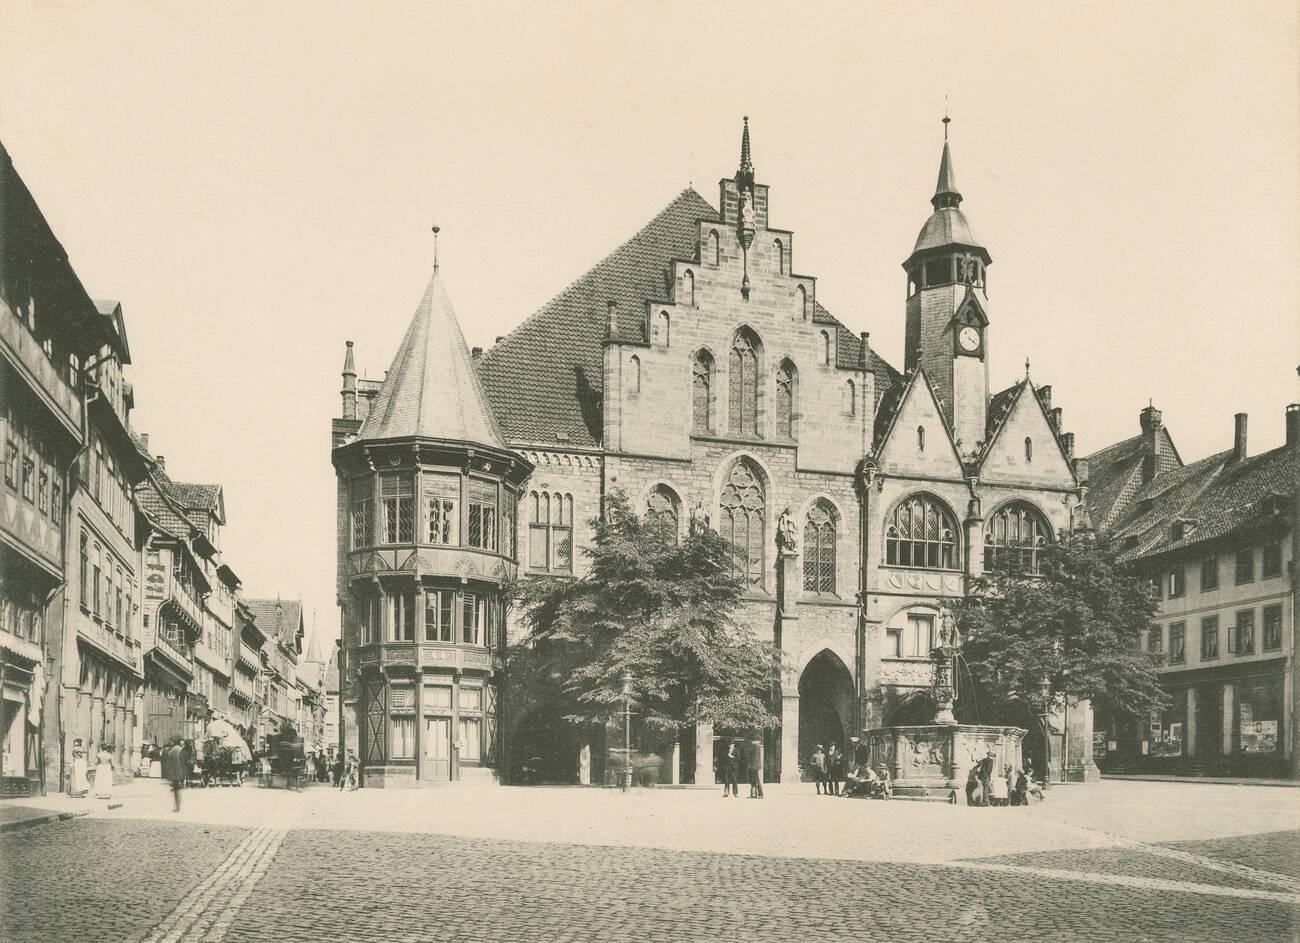 Antique 1902 photograph, City Hall and Historic Market Place in Hildesheim, Lower Saxony, Germany. SOURCE: LATER PHOTOGRAPHIC REPRINT